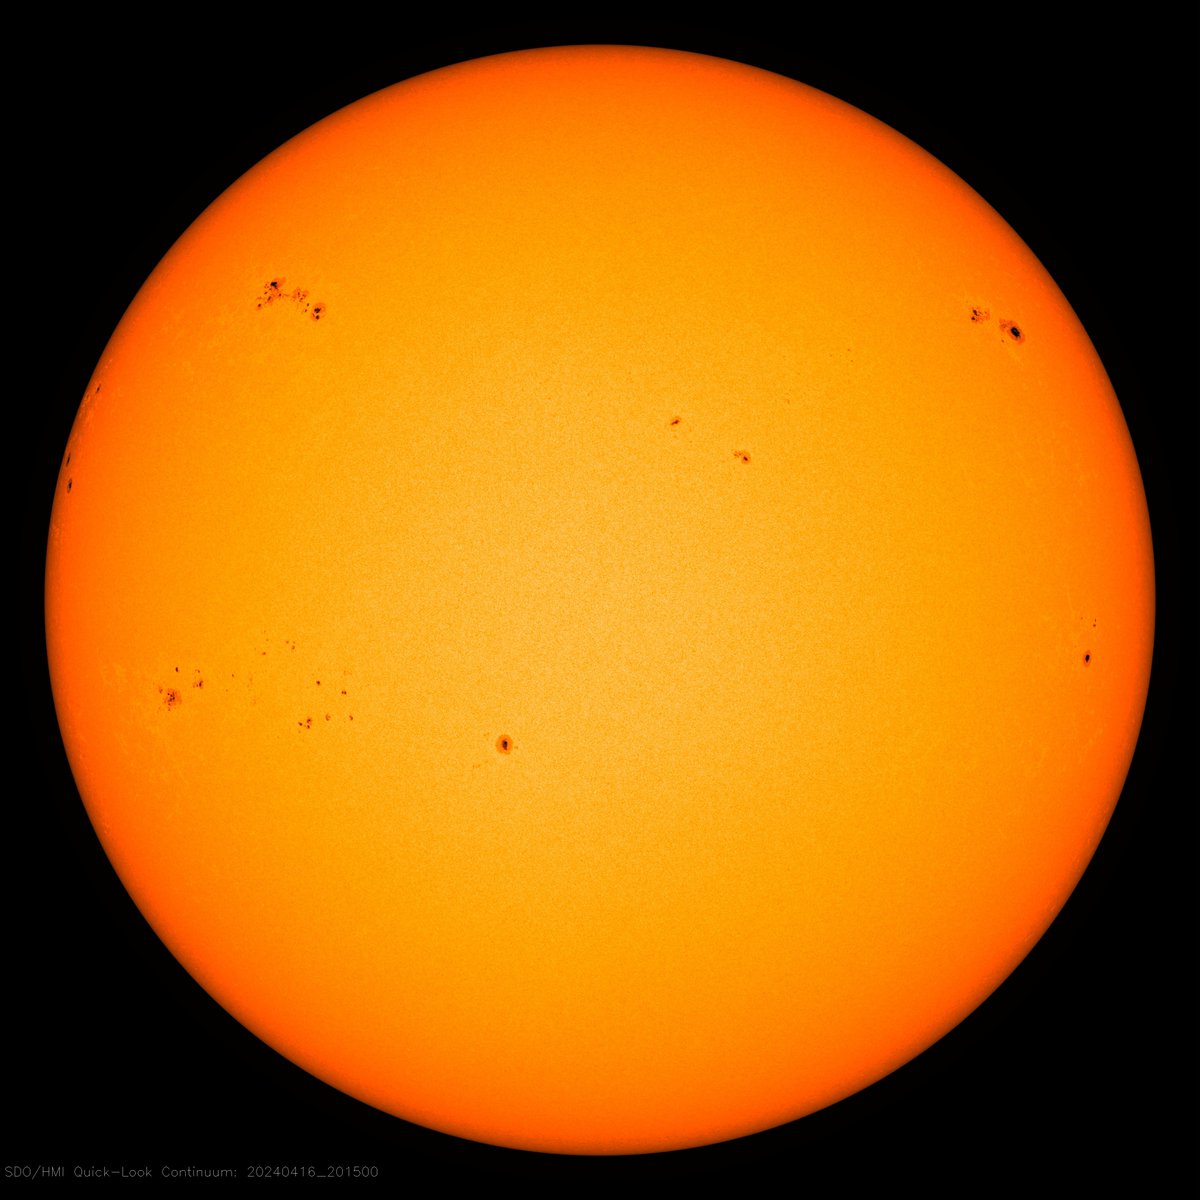 Imagine being a content creator so phony that you can look at 170 sunspots and declare 'it's a #grandsolarminimum.' Now imagine being a viewer so susceptible to propaganda that you'd believe such bollocks. These logical leaps are required for many many dollars paid out by Y.T.